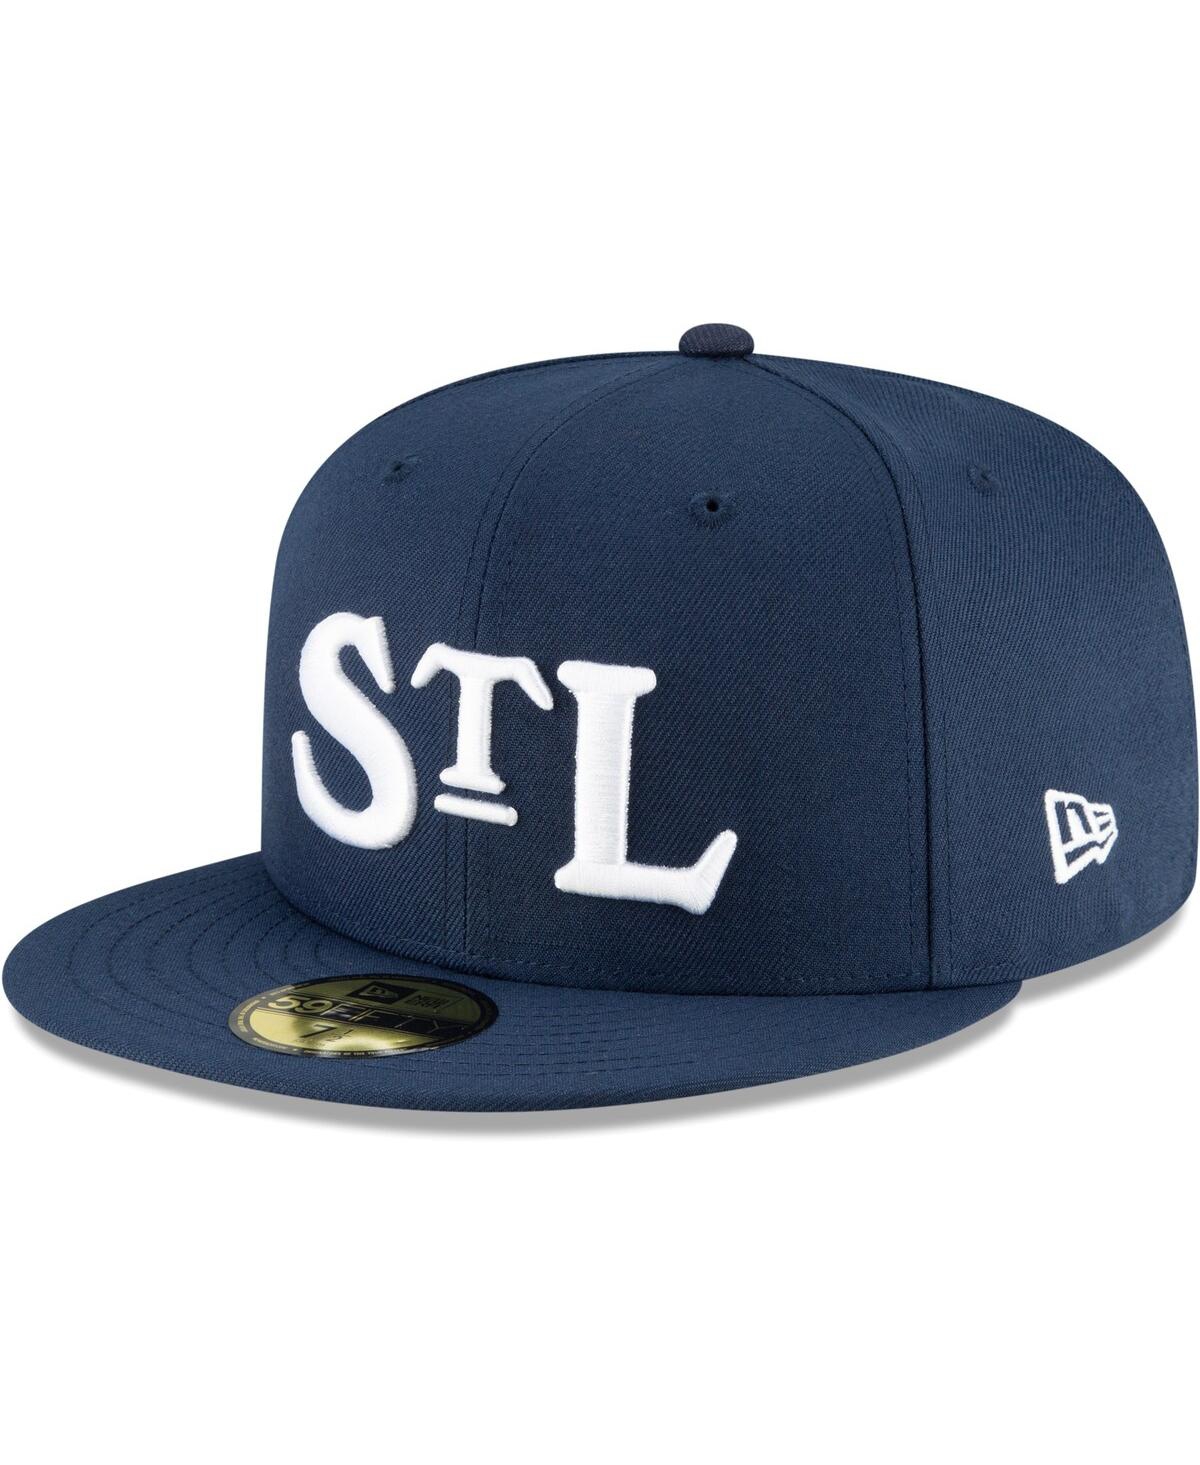 Shop New Era Men's  Navy St. Louis Stars Cooperstown Collection Turn Back The Clock 59fifty Fitted Hat